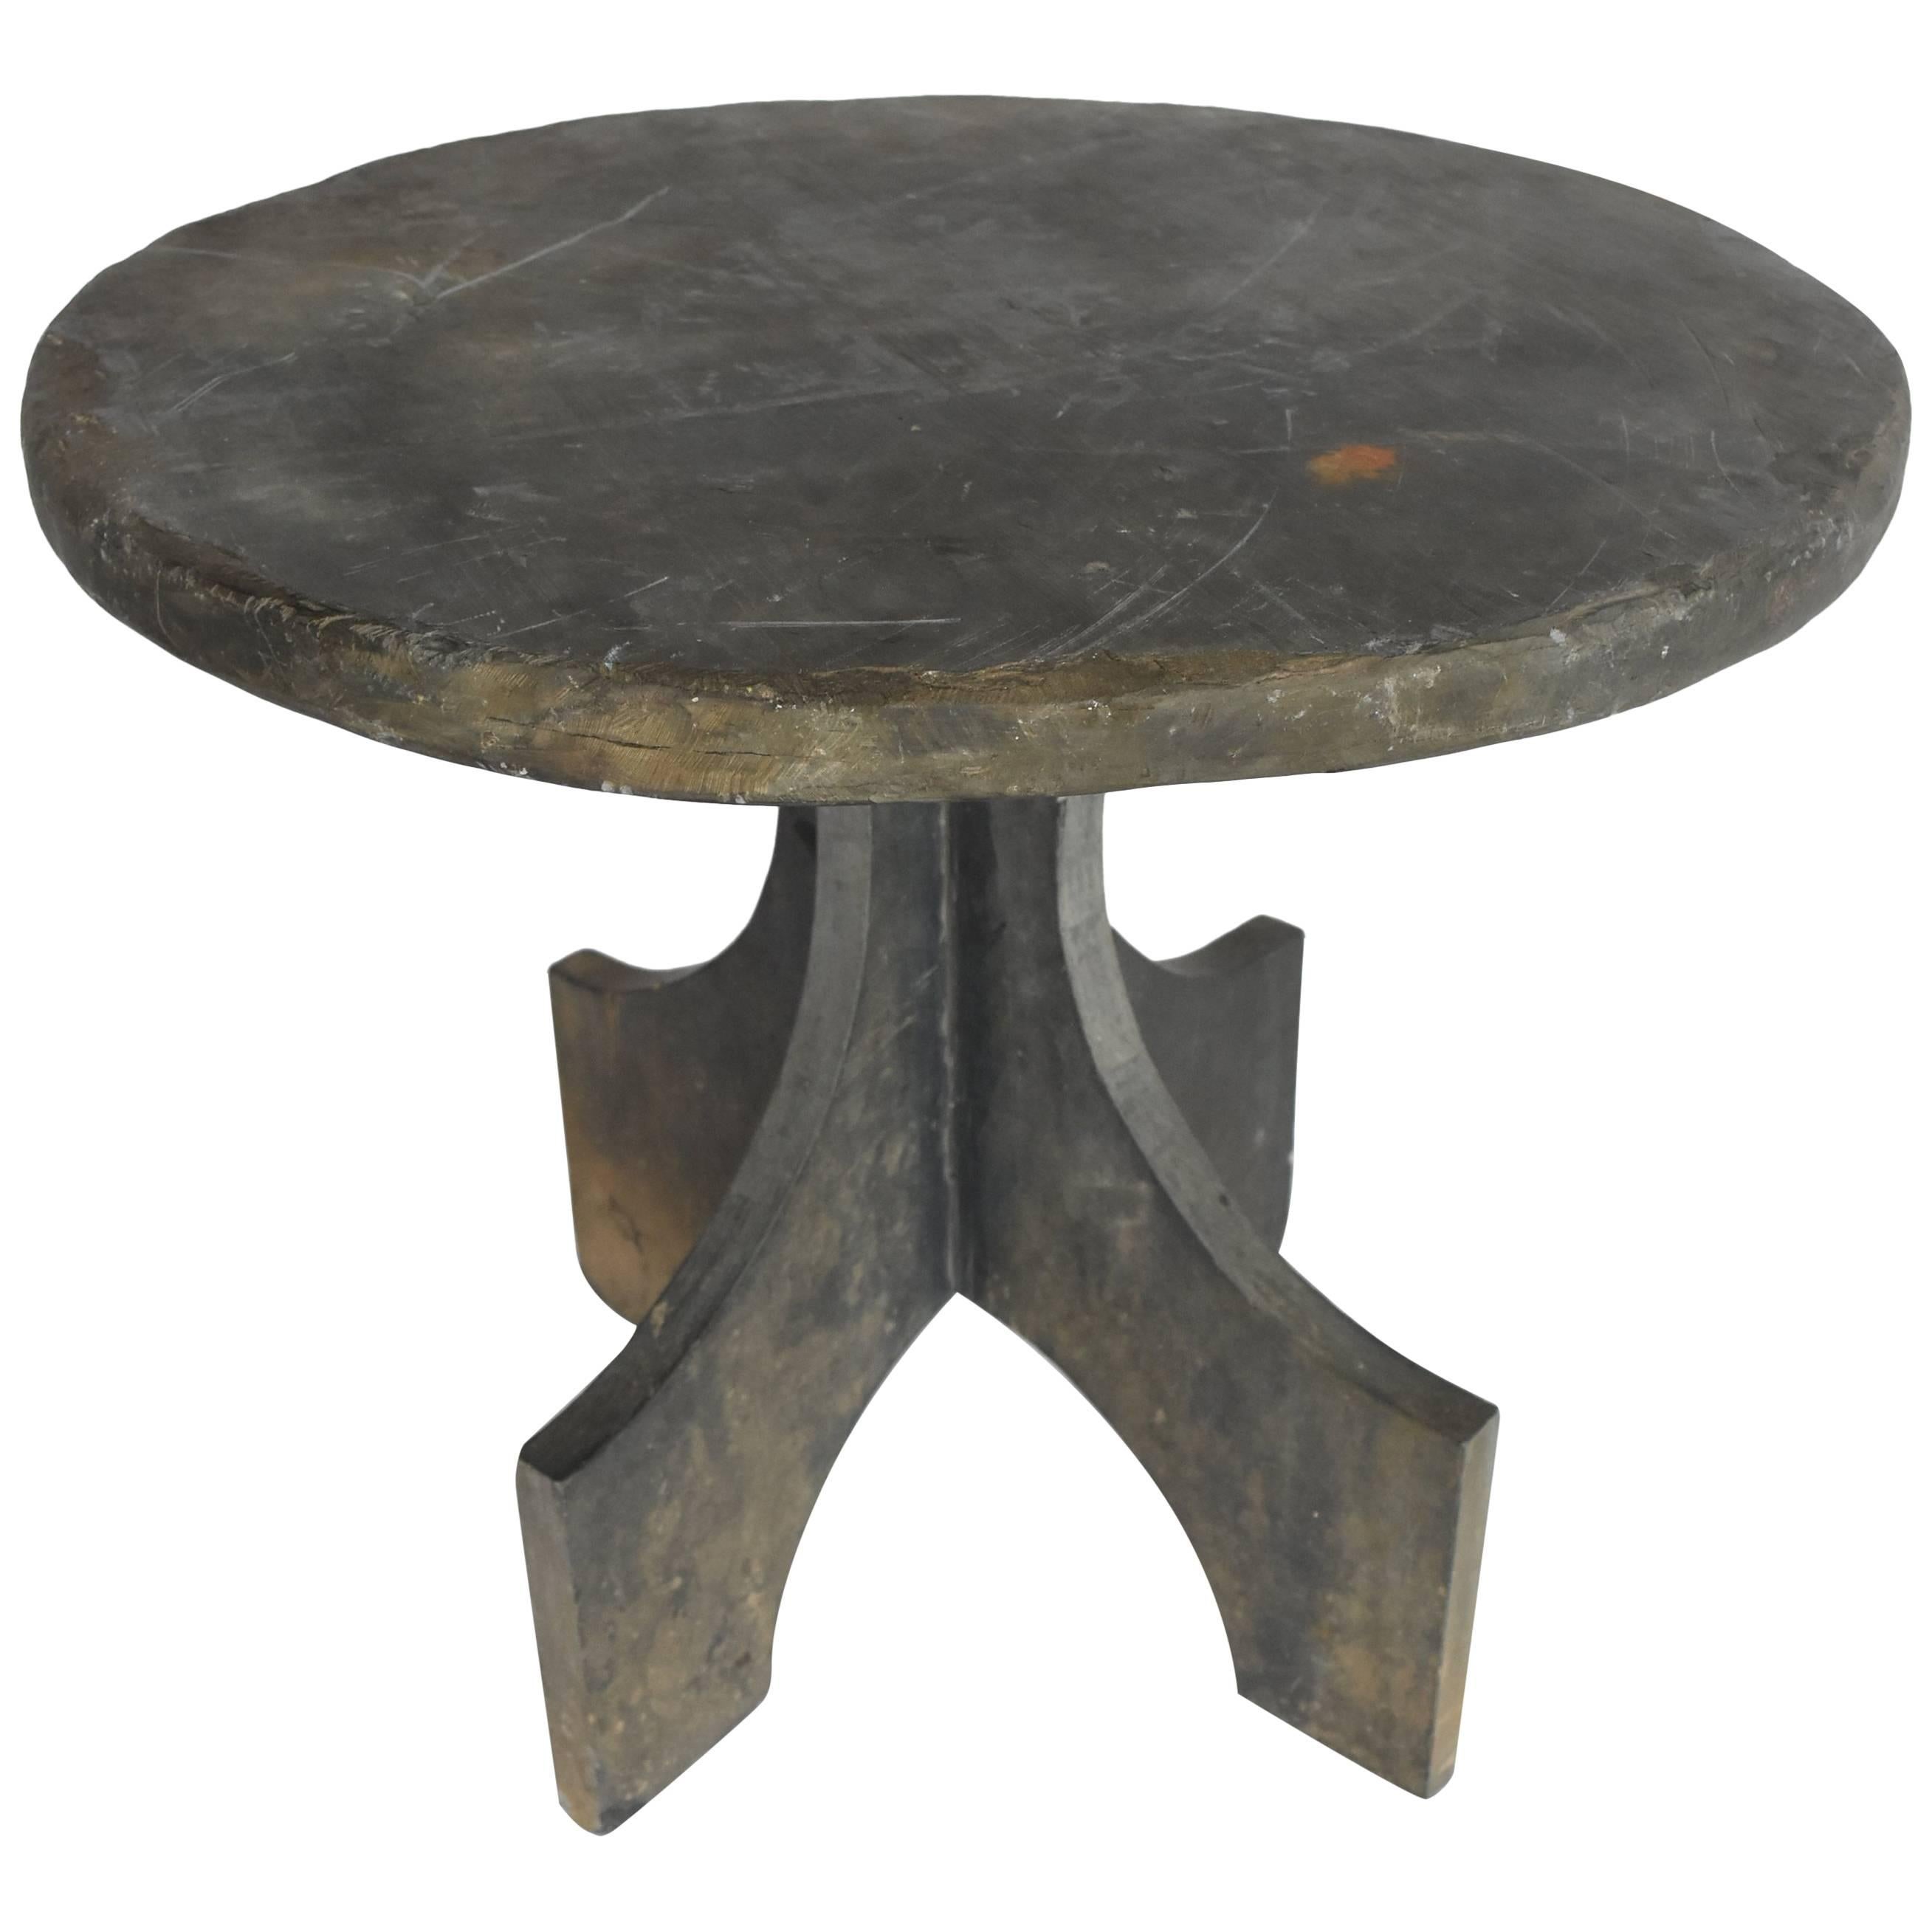 Early 20th Century Portuguese Round Stone Side Table